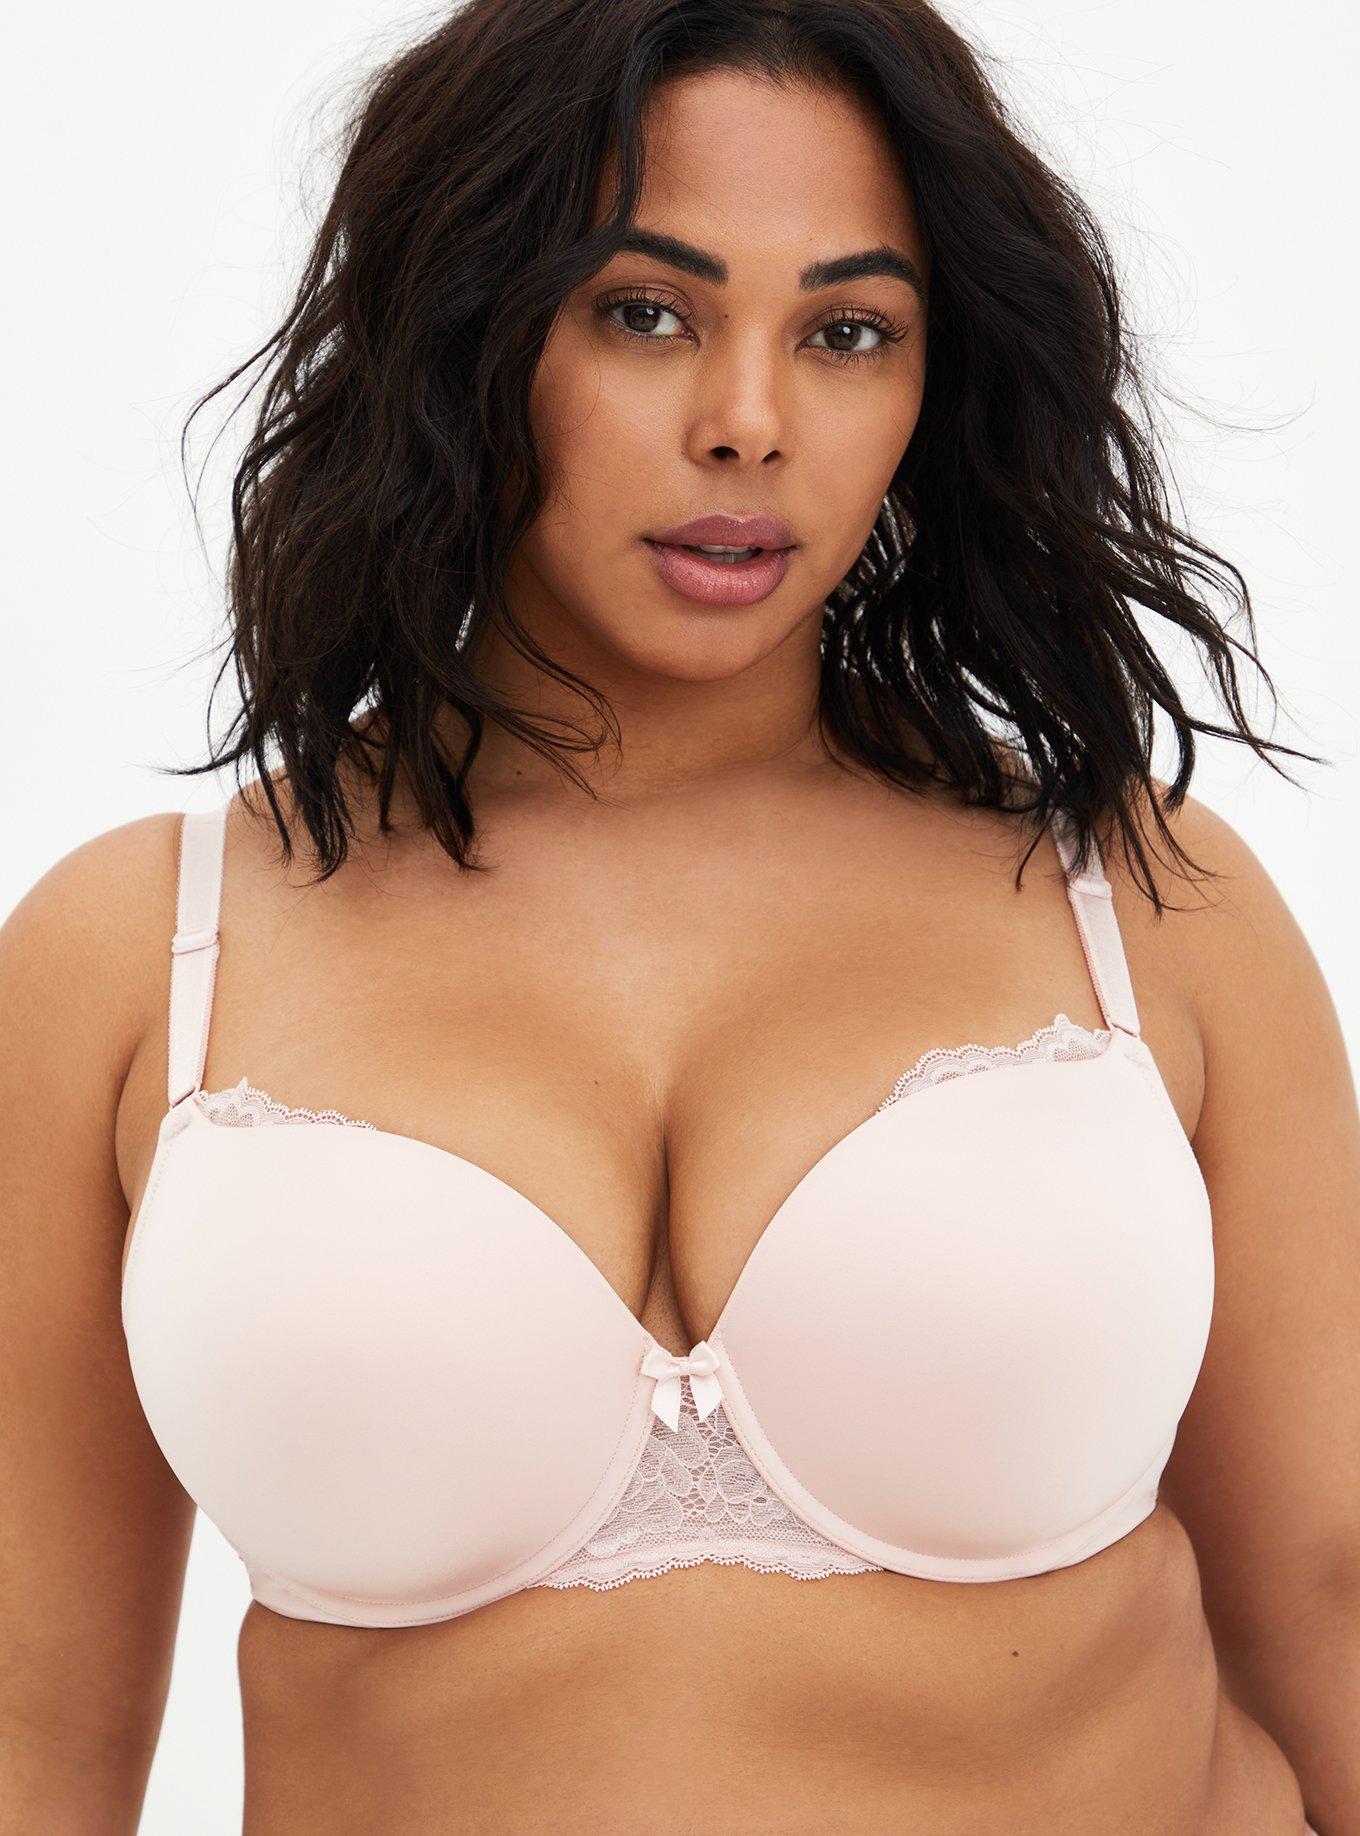 Torrid curves strapless push up bra size 42DD. Brand new with tags.